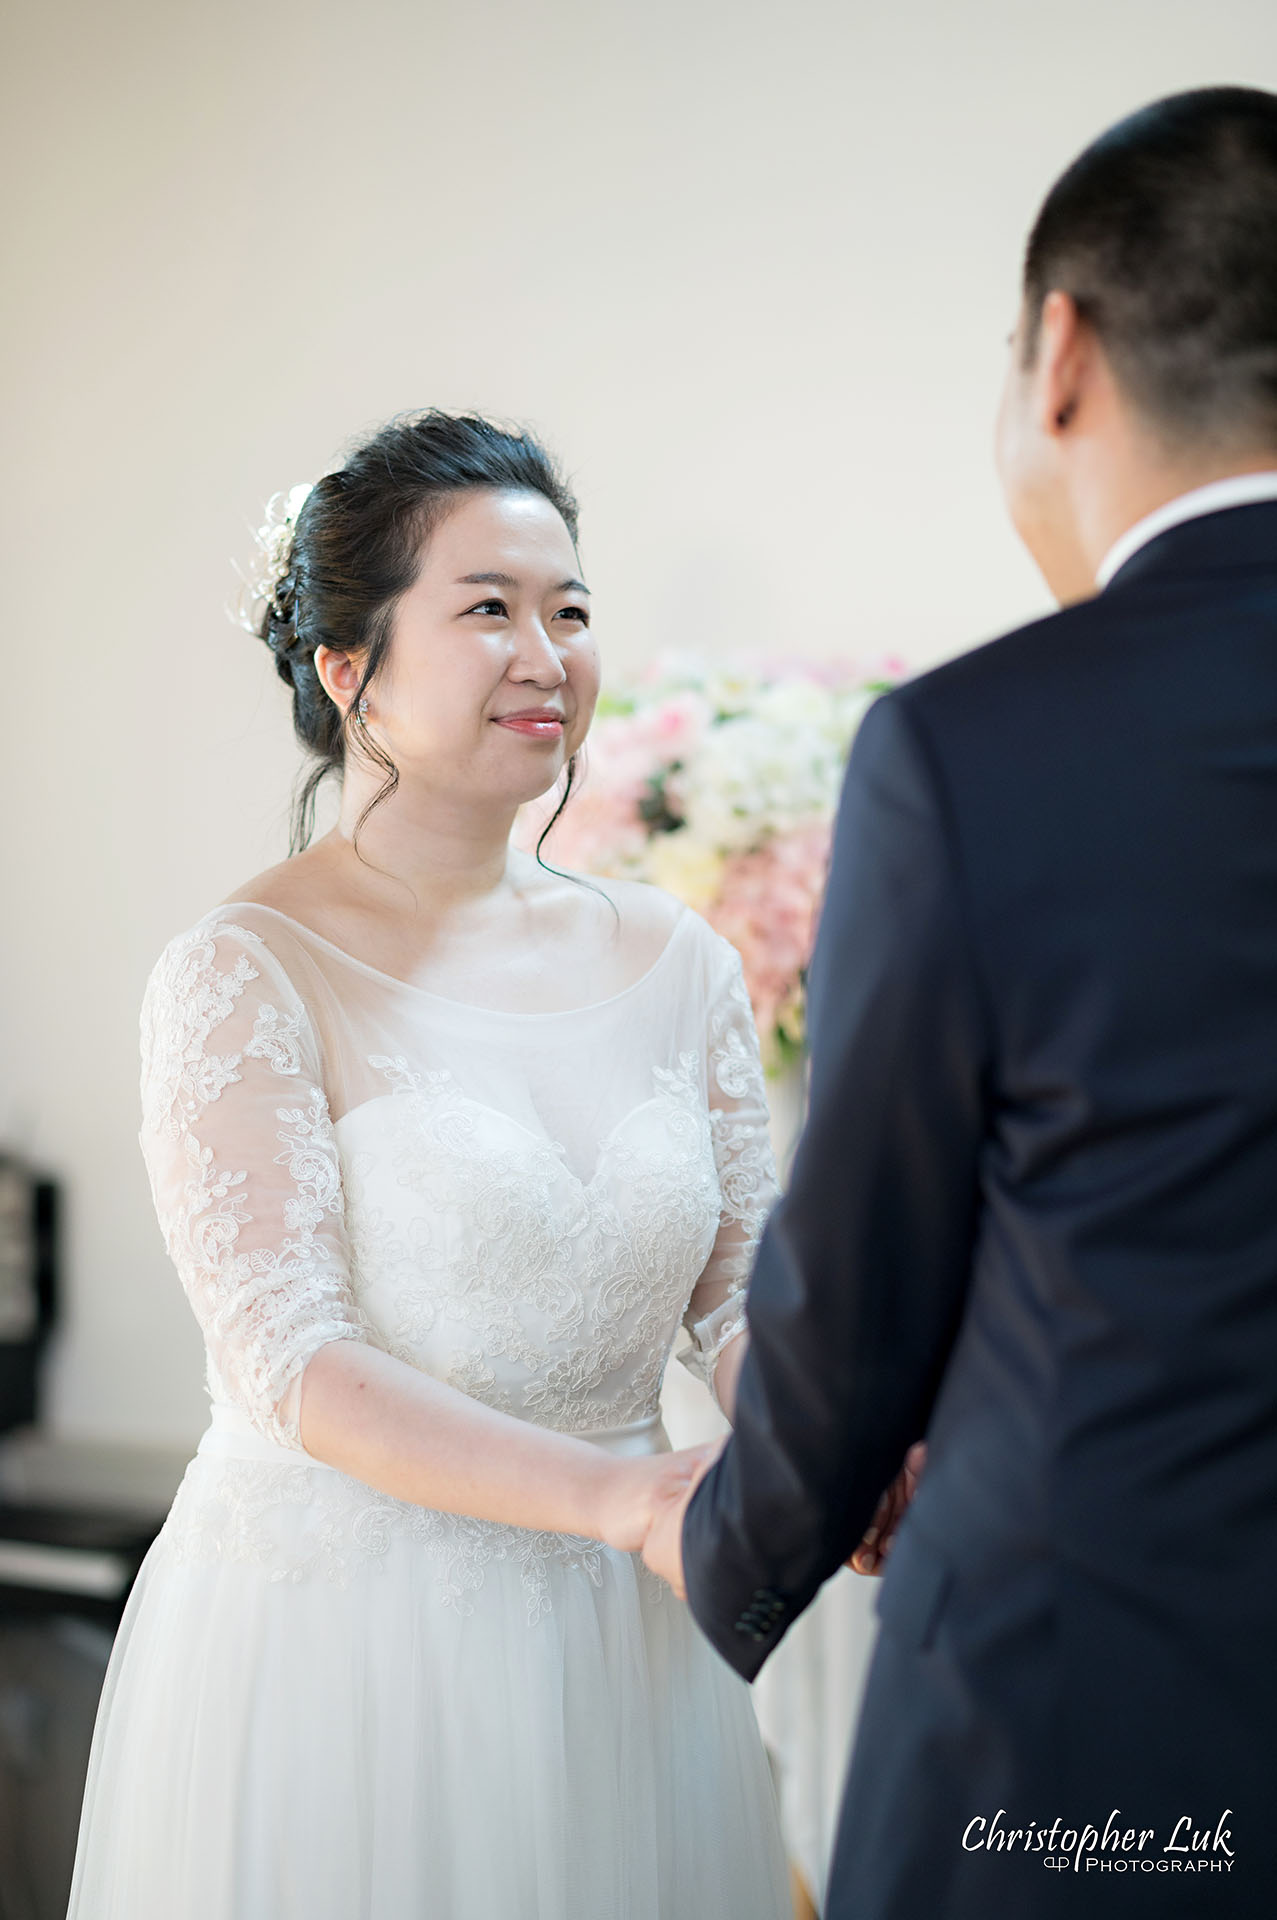 Christopher Luk Toronto Wedding Photographer The Doctor's House Chapel Kleinburg Natural Candid Photojournalistic Posed Bride Groom Ceremony Vows Reaction Smile Happy Micro Microwedding 